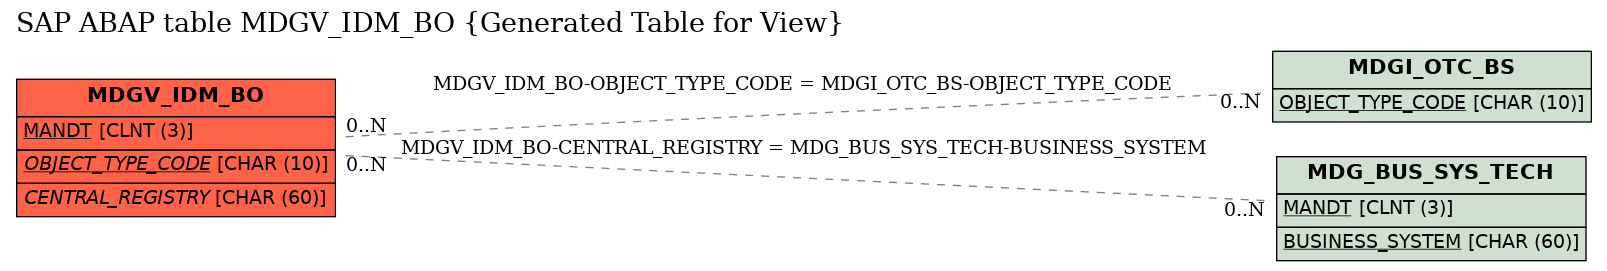 E-R Diagram for table MDGV_IDM_BO (Generated Table for View)